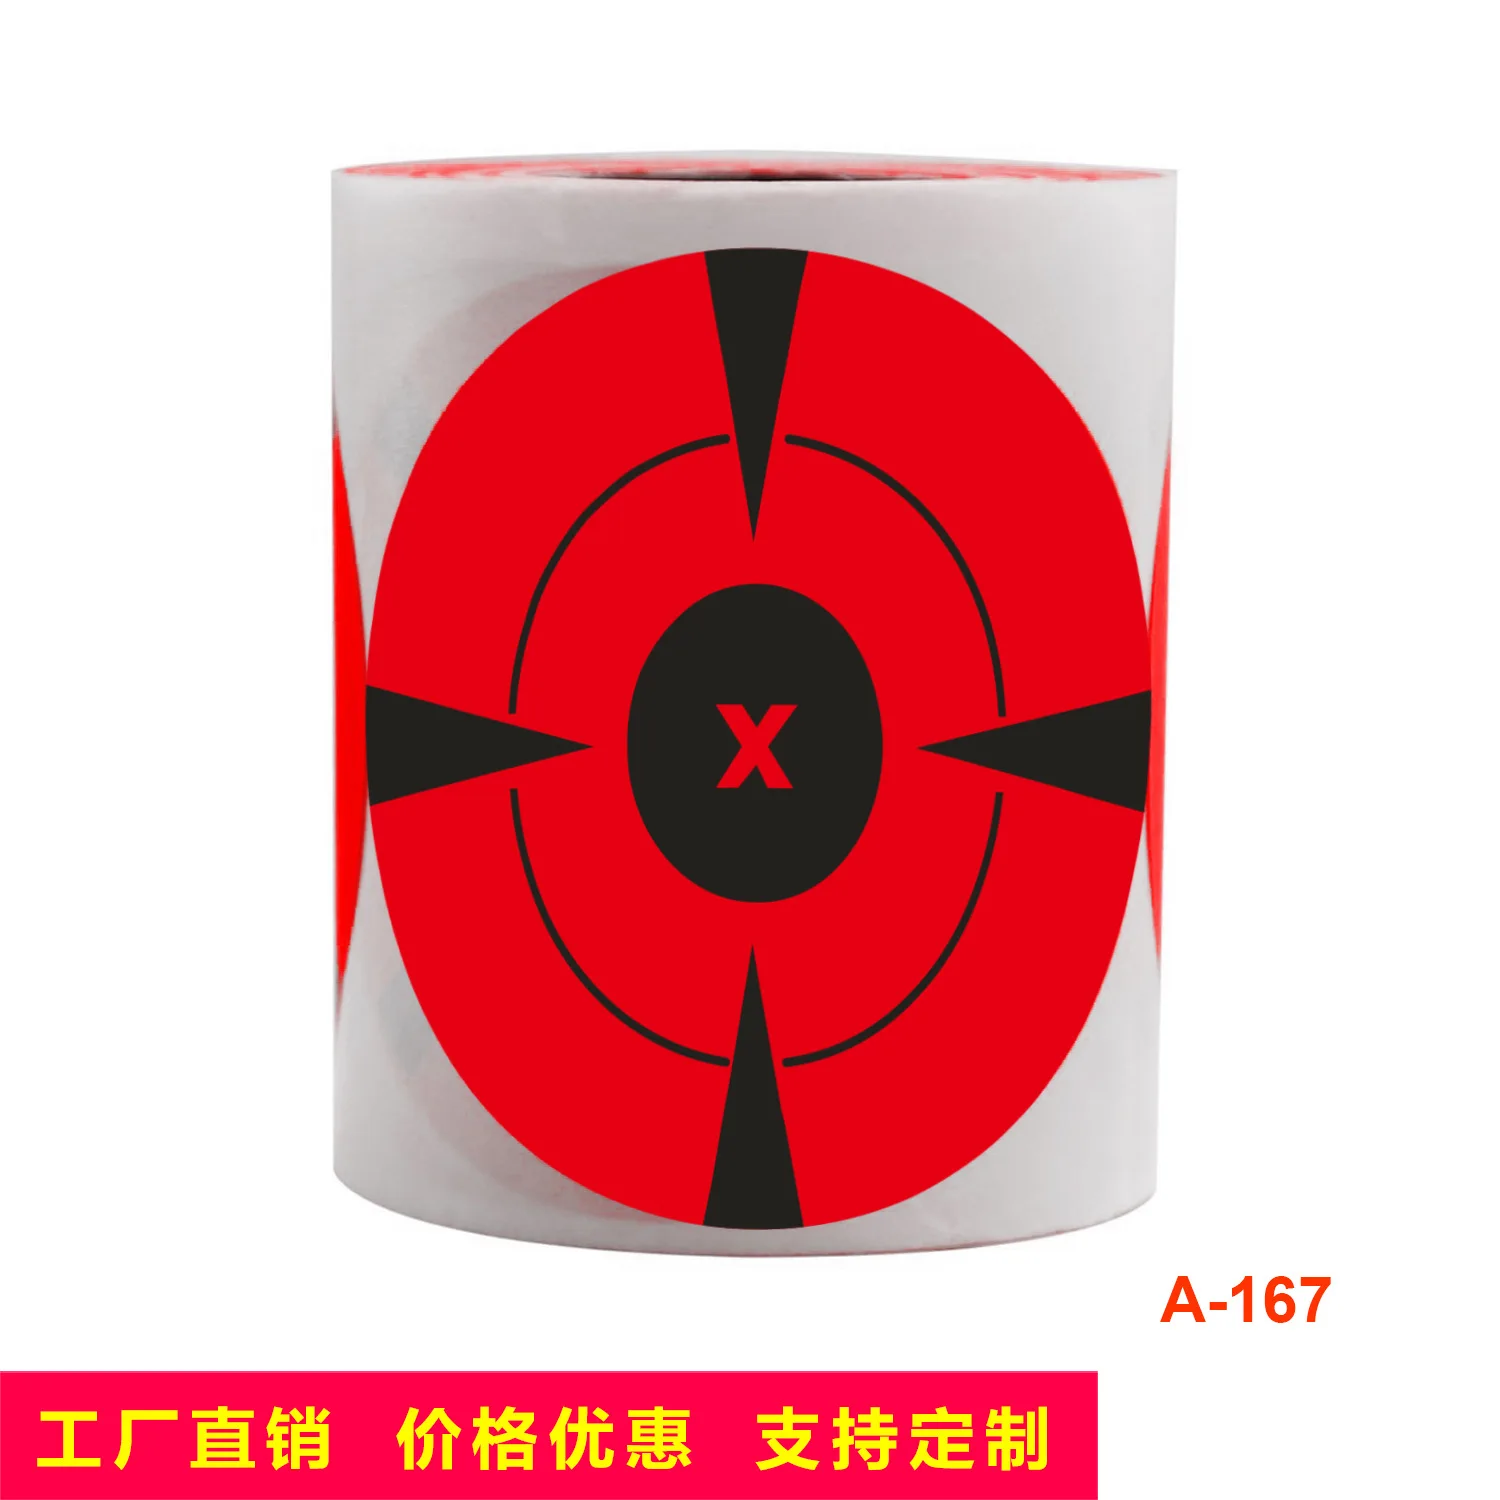 

Popular shooting target shooting fluorescent red roll up aiming sticker bow and arrow dart target shooting paper